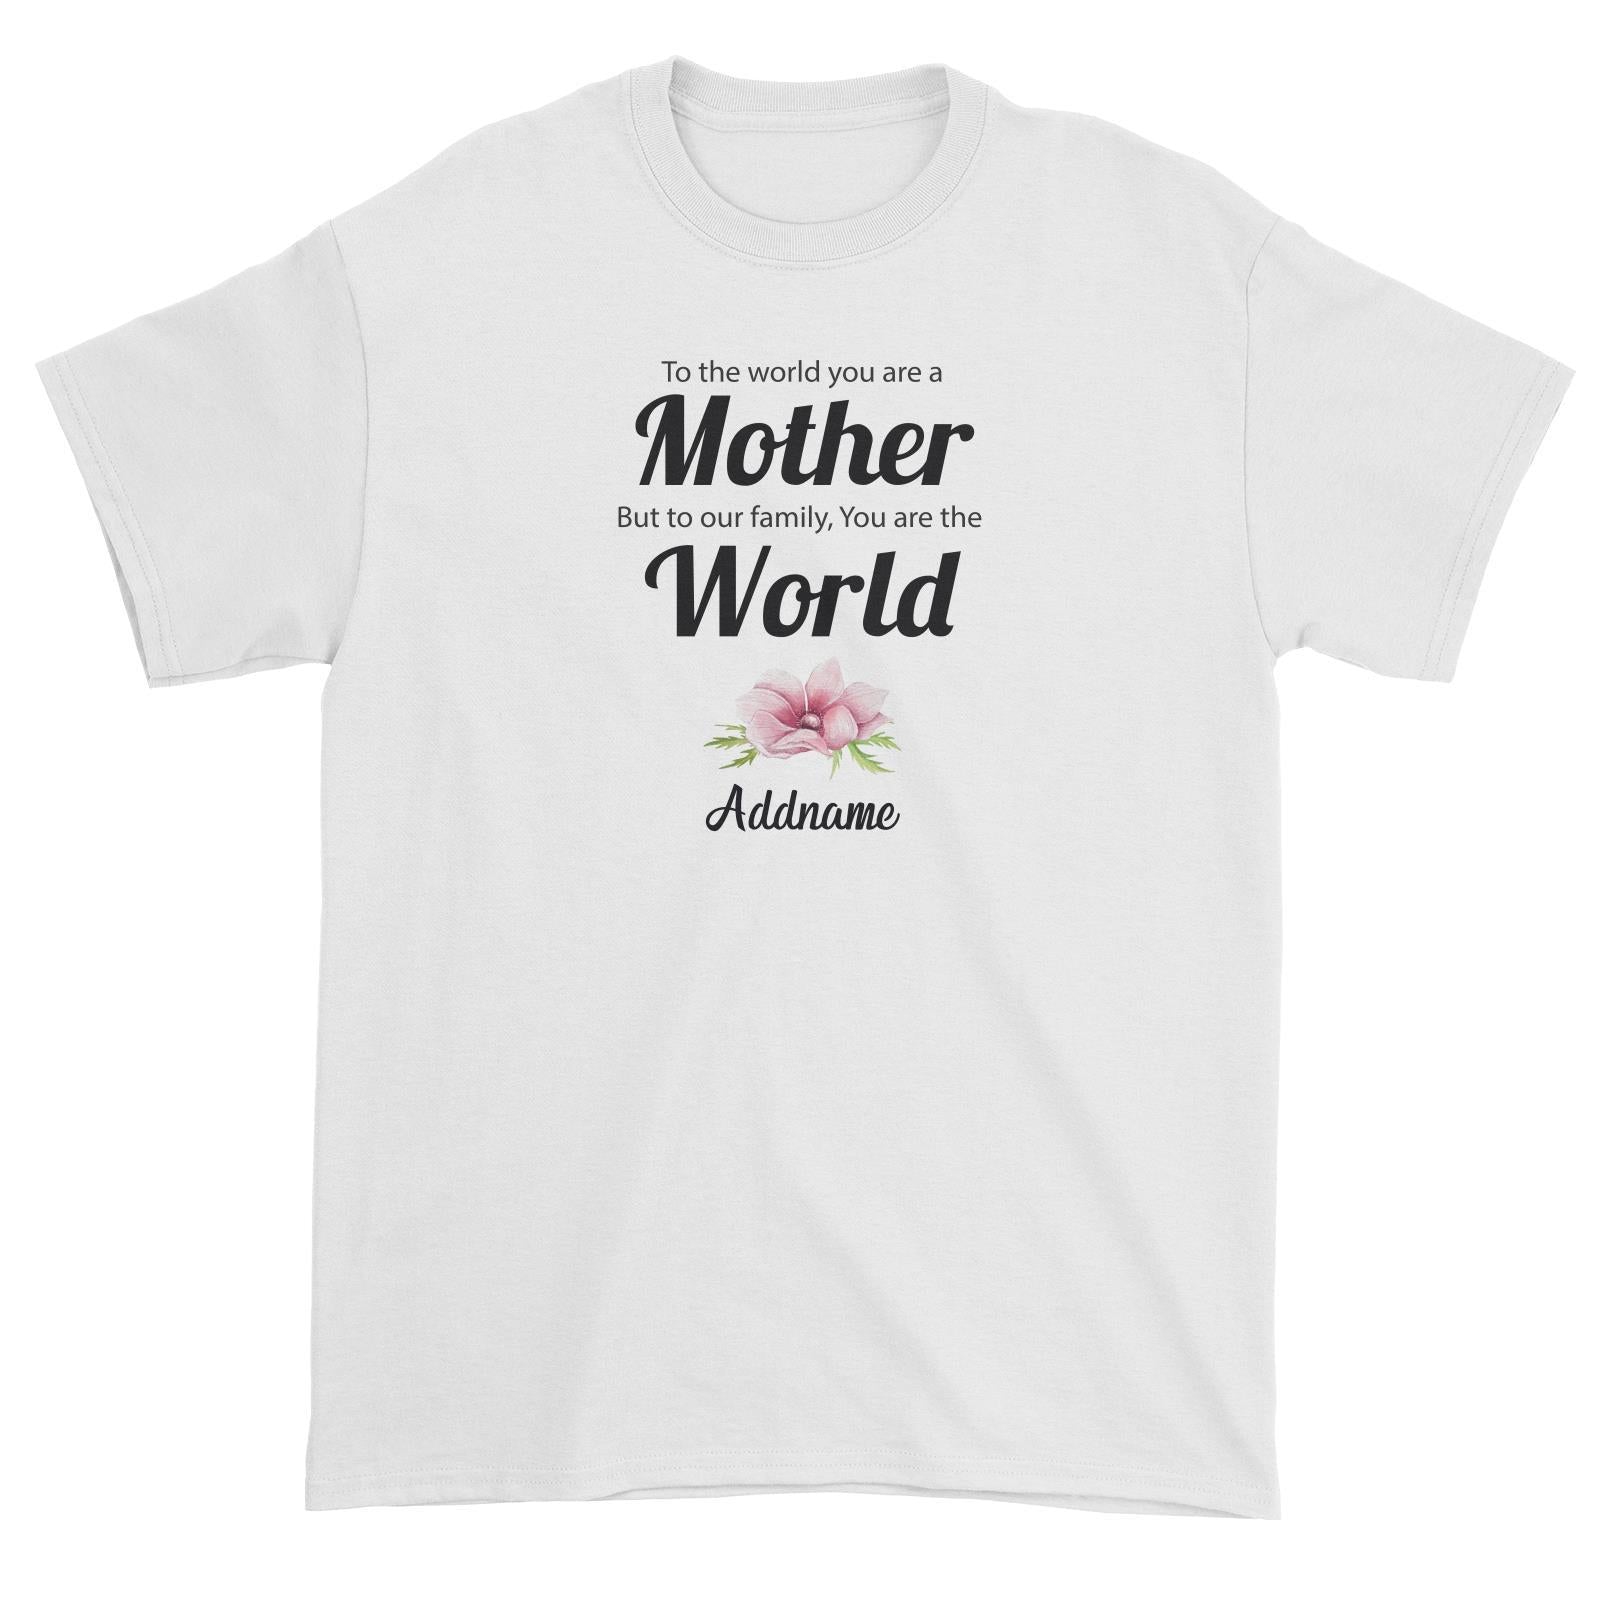 Sweet Mom Quotes 1 To The World You Are A Mother But To Our Family, You Are The World Addname Unisex T-Shirt